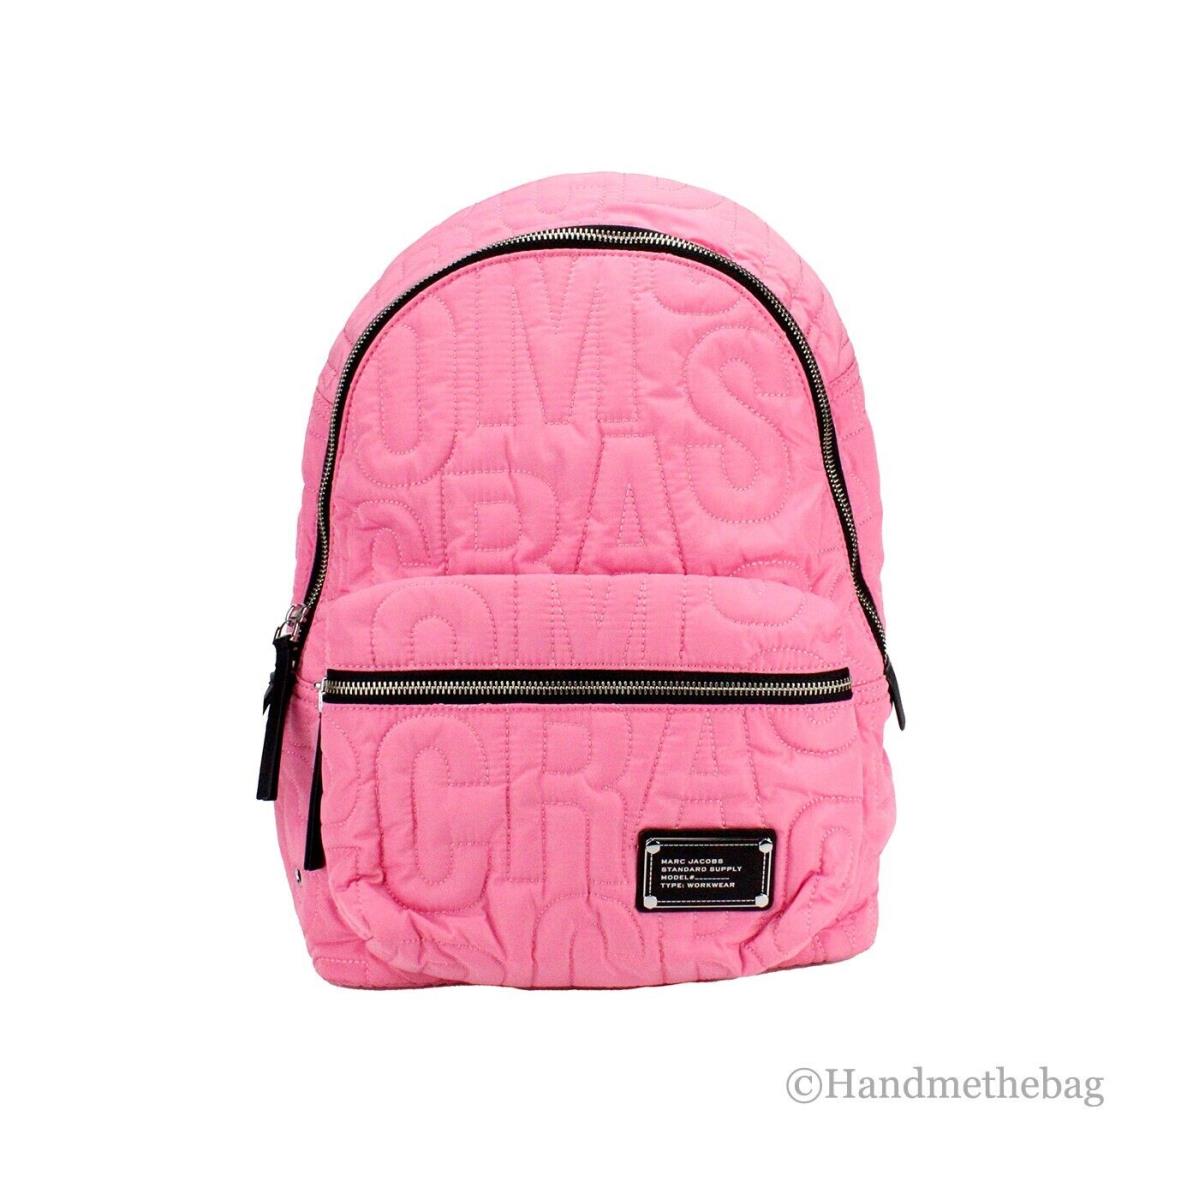 Marc Jacobs Medium Candy Pink Monogram Quilted Puffy Nylon Backpack Bookbag